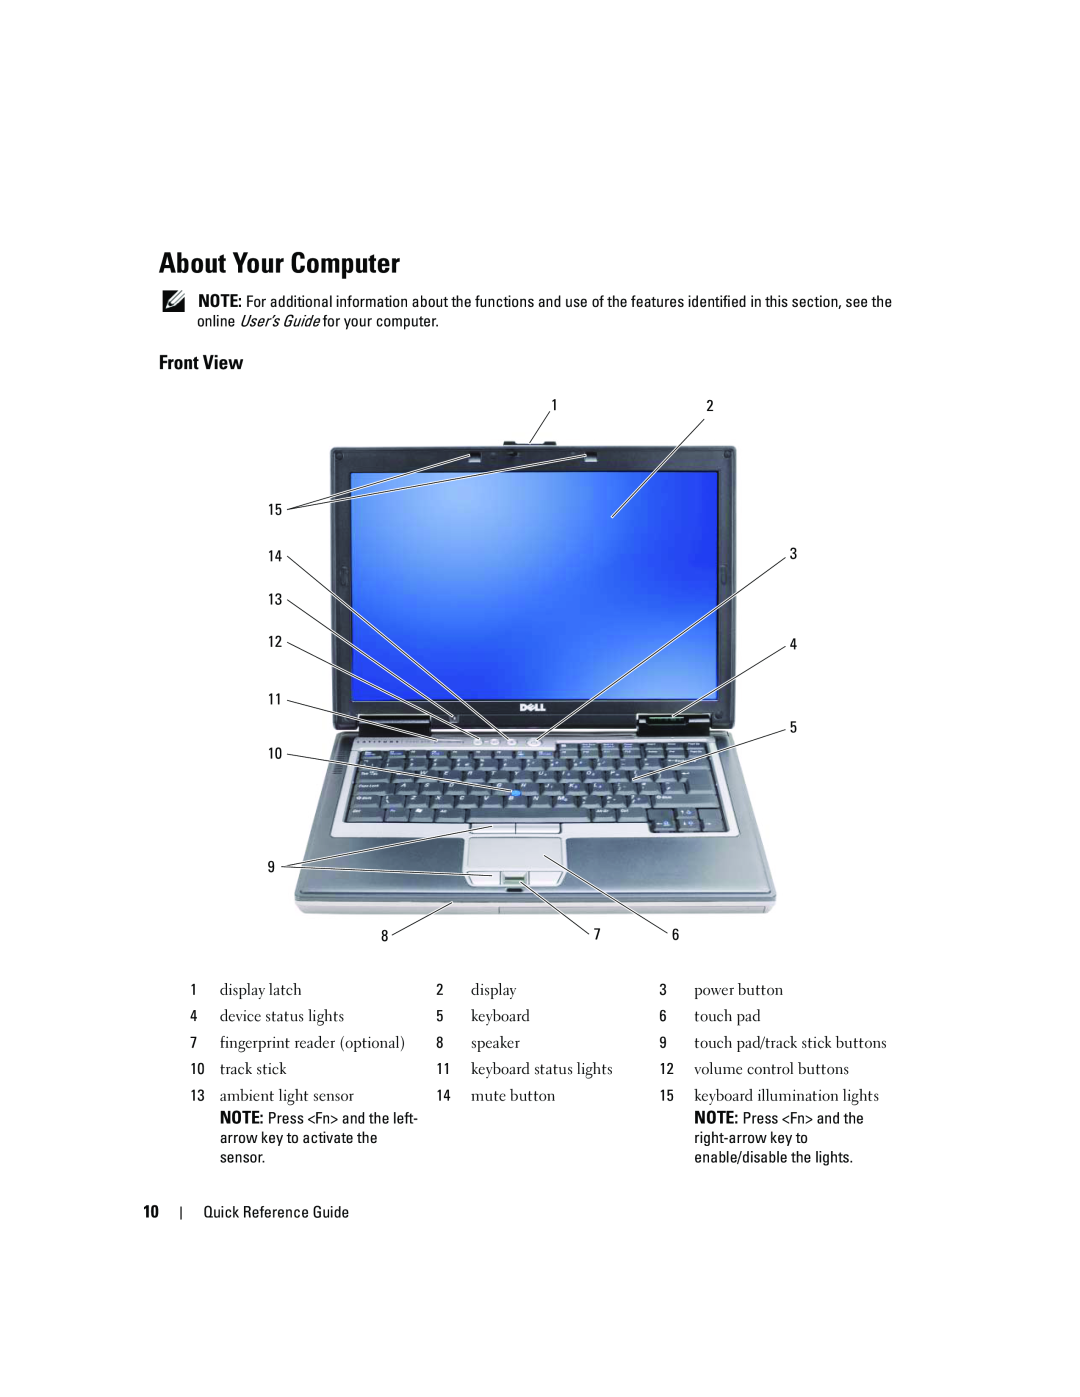 Dell ATG D620 manual About Your Computer, Front View 